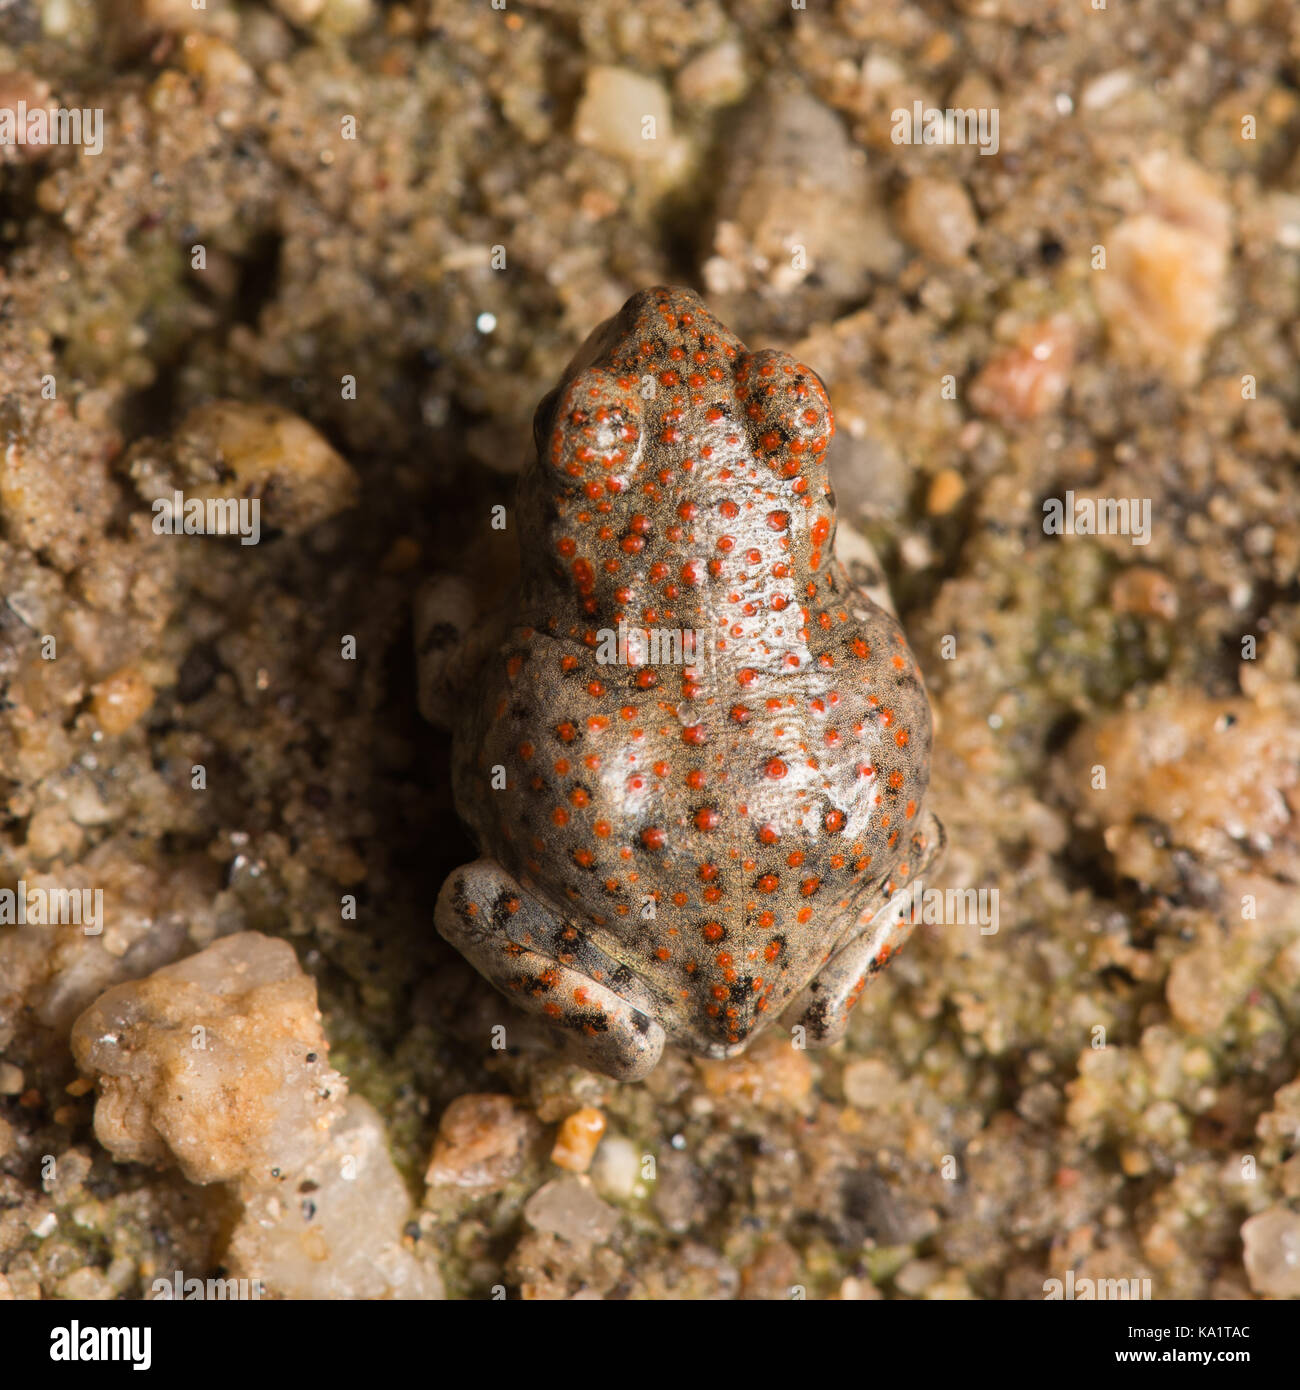 A recently metamorphosed Red-spotted Toad (Anaxyrus punctatus) from Pima County, Arizona, USA. Stock Photo